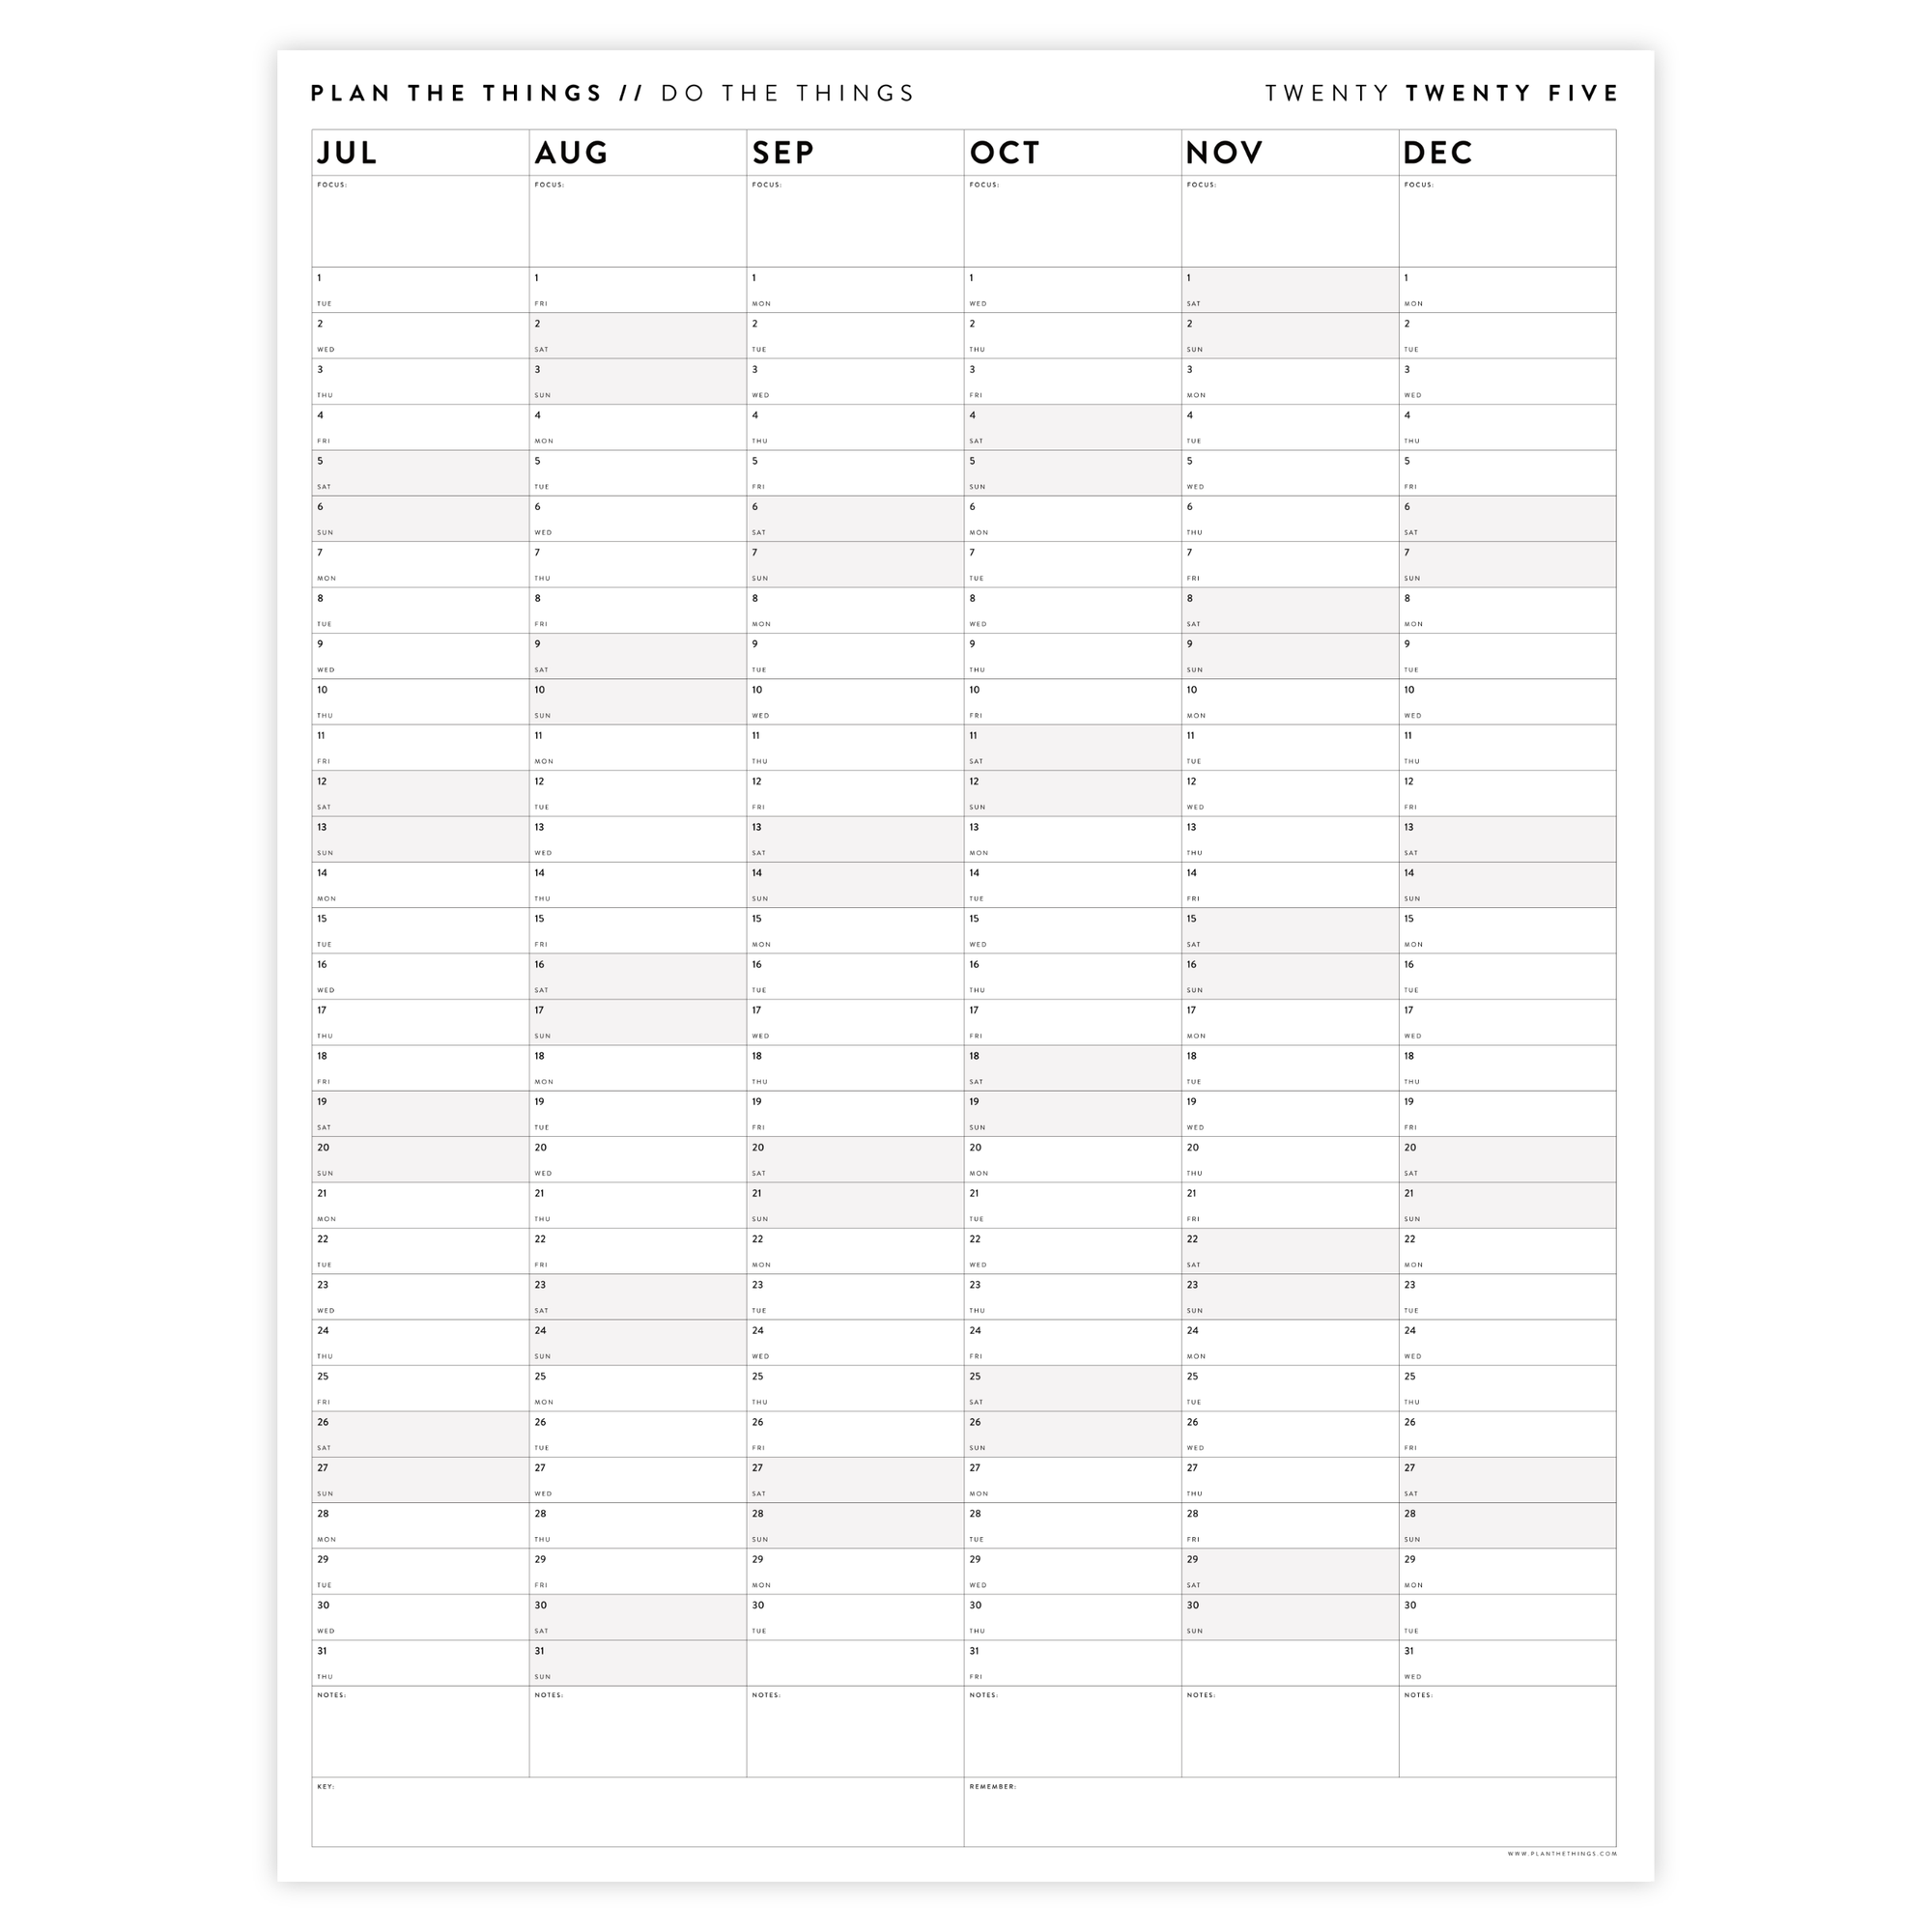 SIX MONTH 2025 GIANT WALL CALENDAR (JULY TO DECEMBER) WITH GRAY WEEKENDS